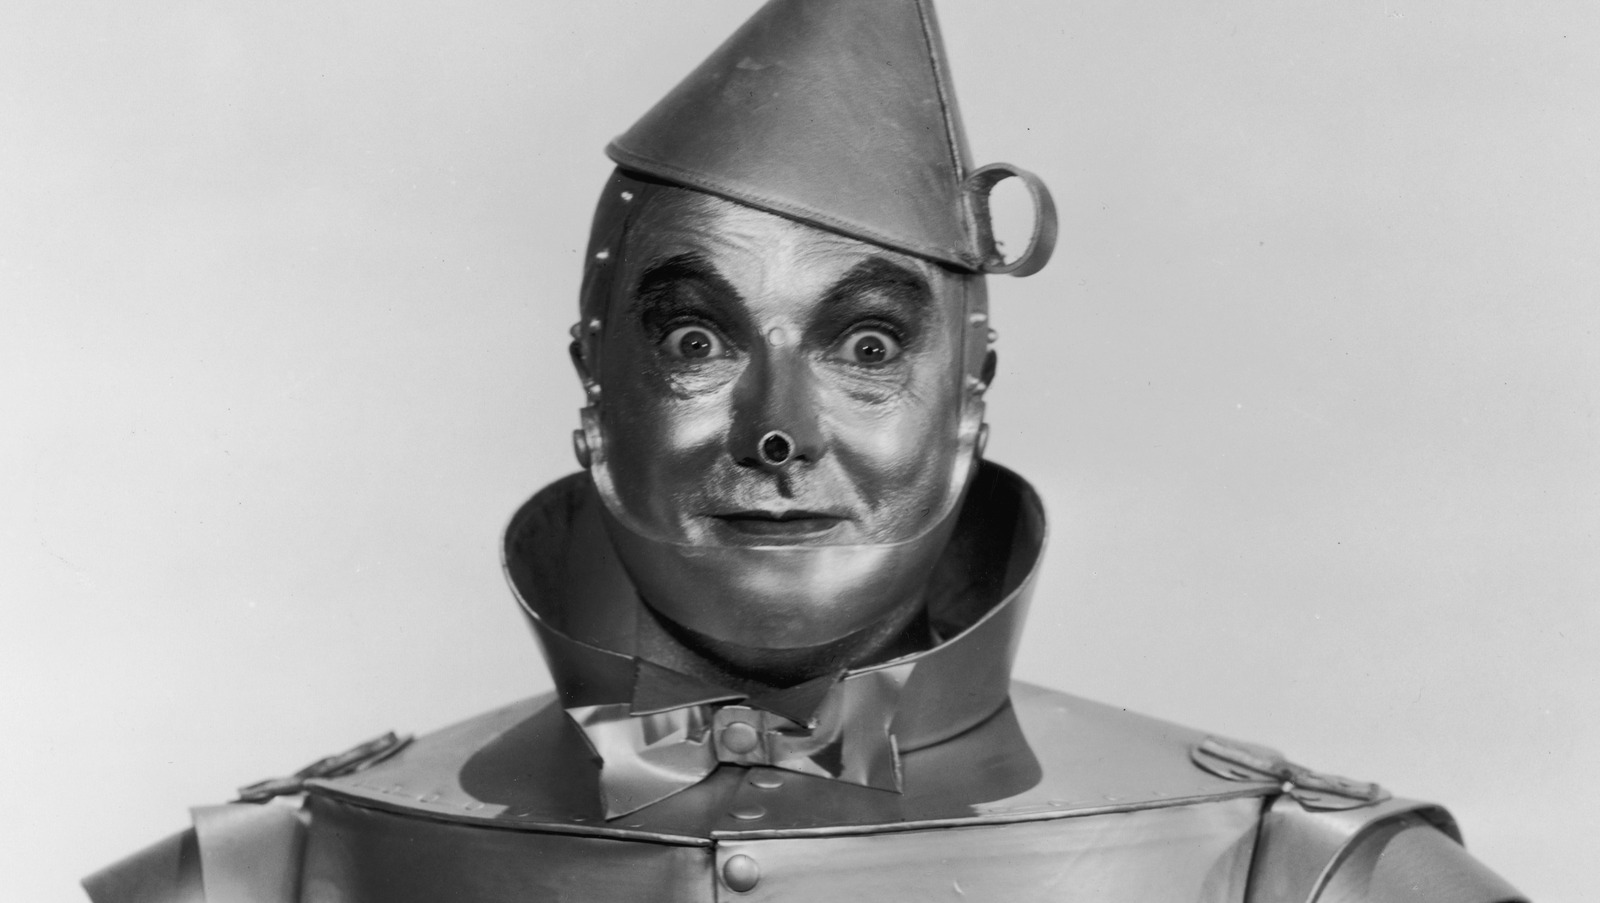 Why The Tin Man From The Wizard Of Oz Was Originally So Disturbing